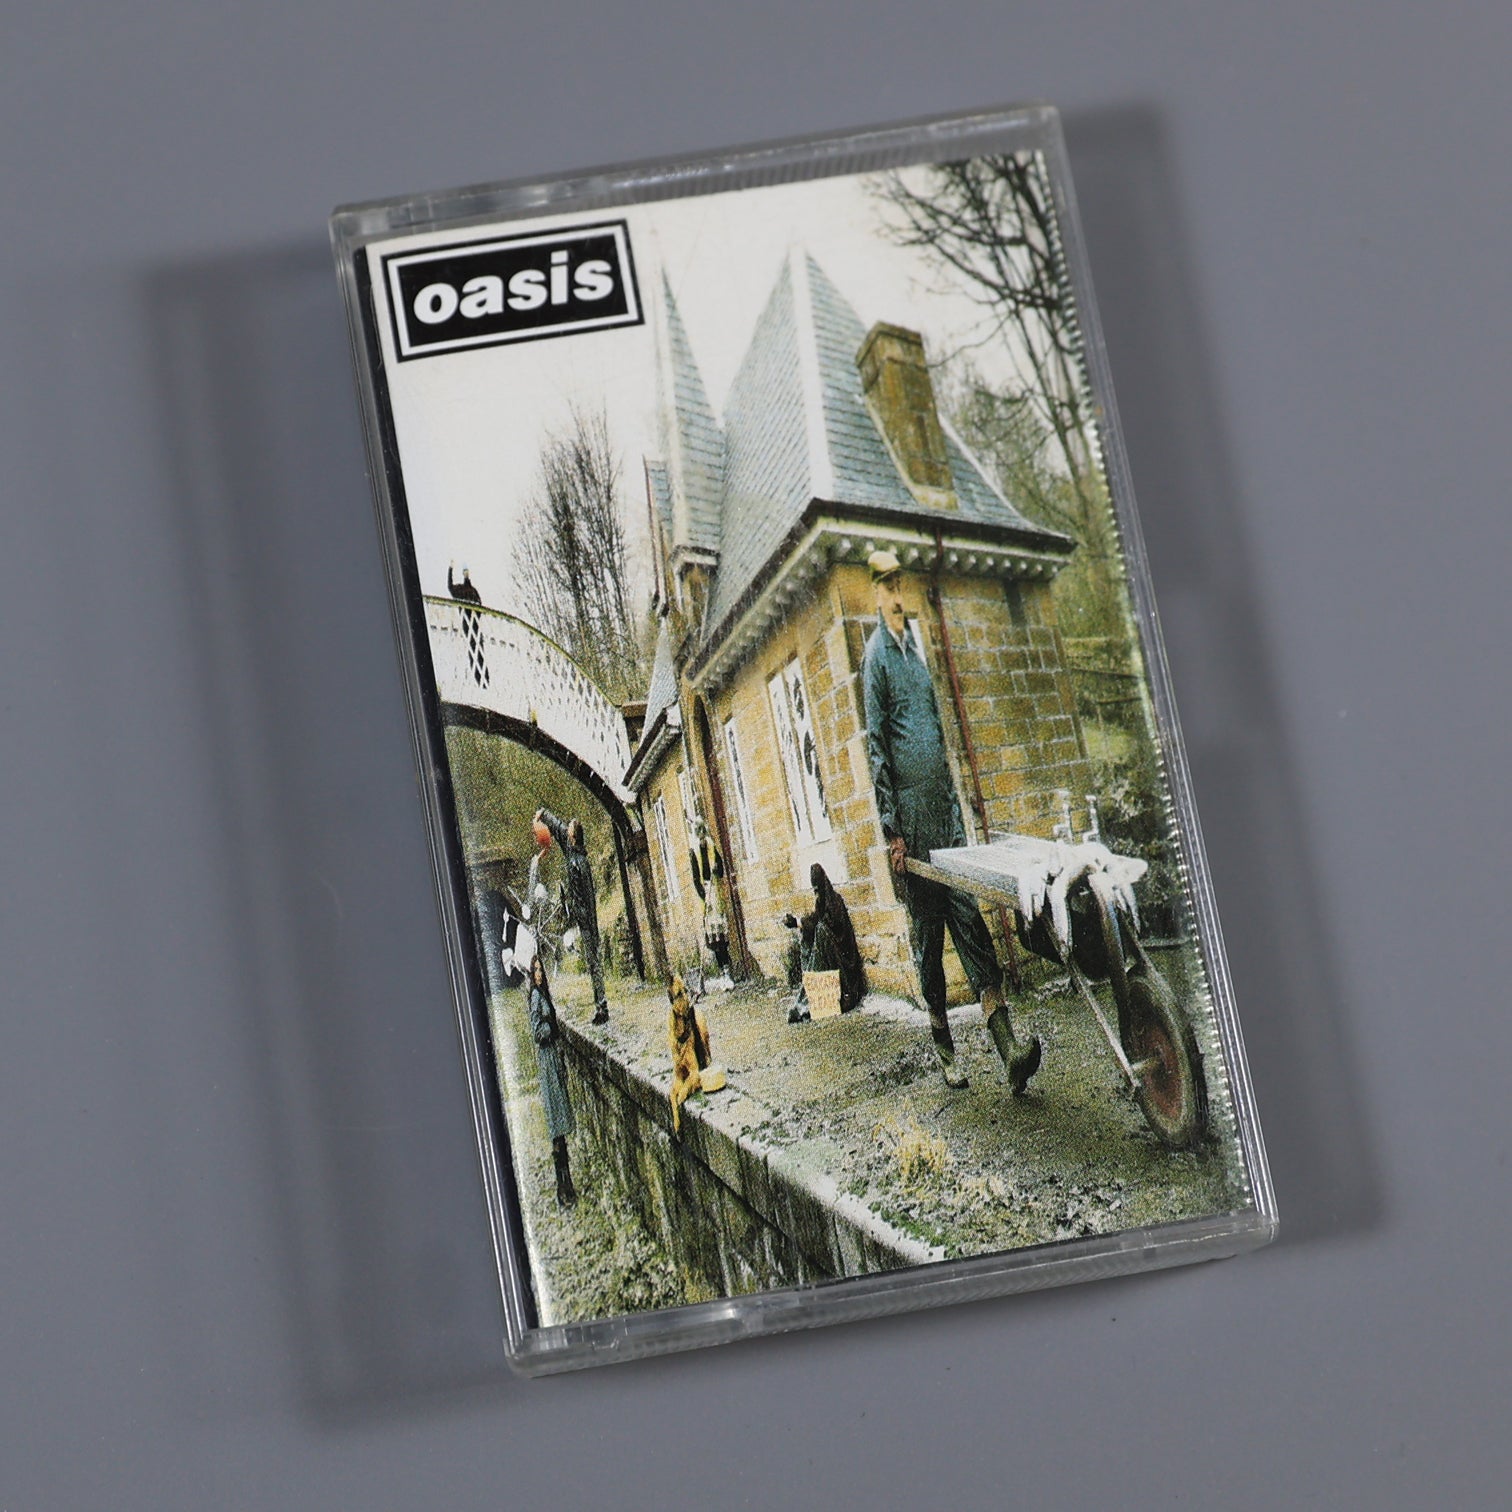 Oasis - 'Some Might Say' Creation Records Cassette - New Item